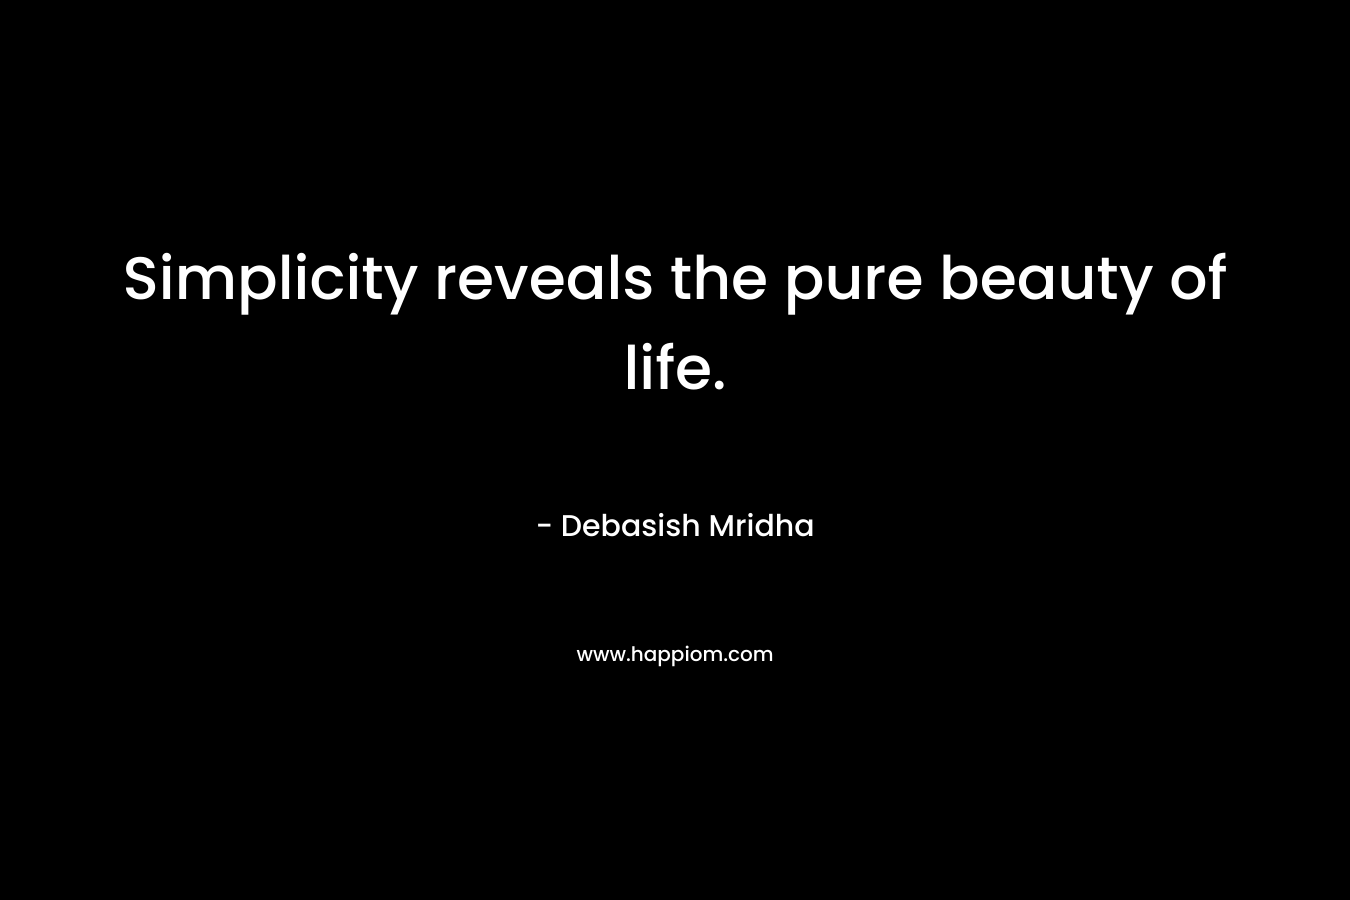 Simplicity reveals the pure beauty of life.